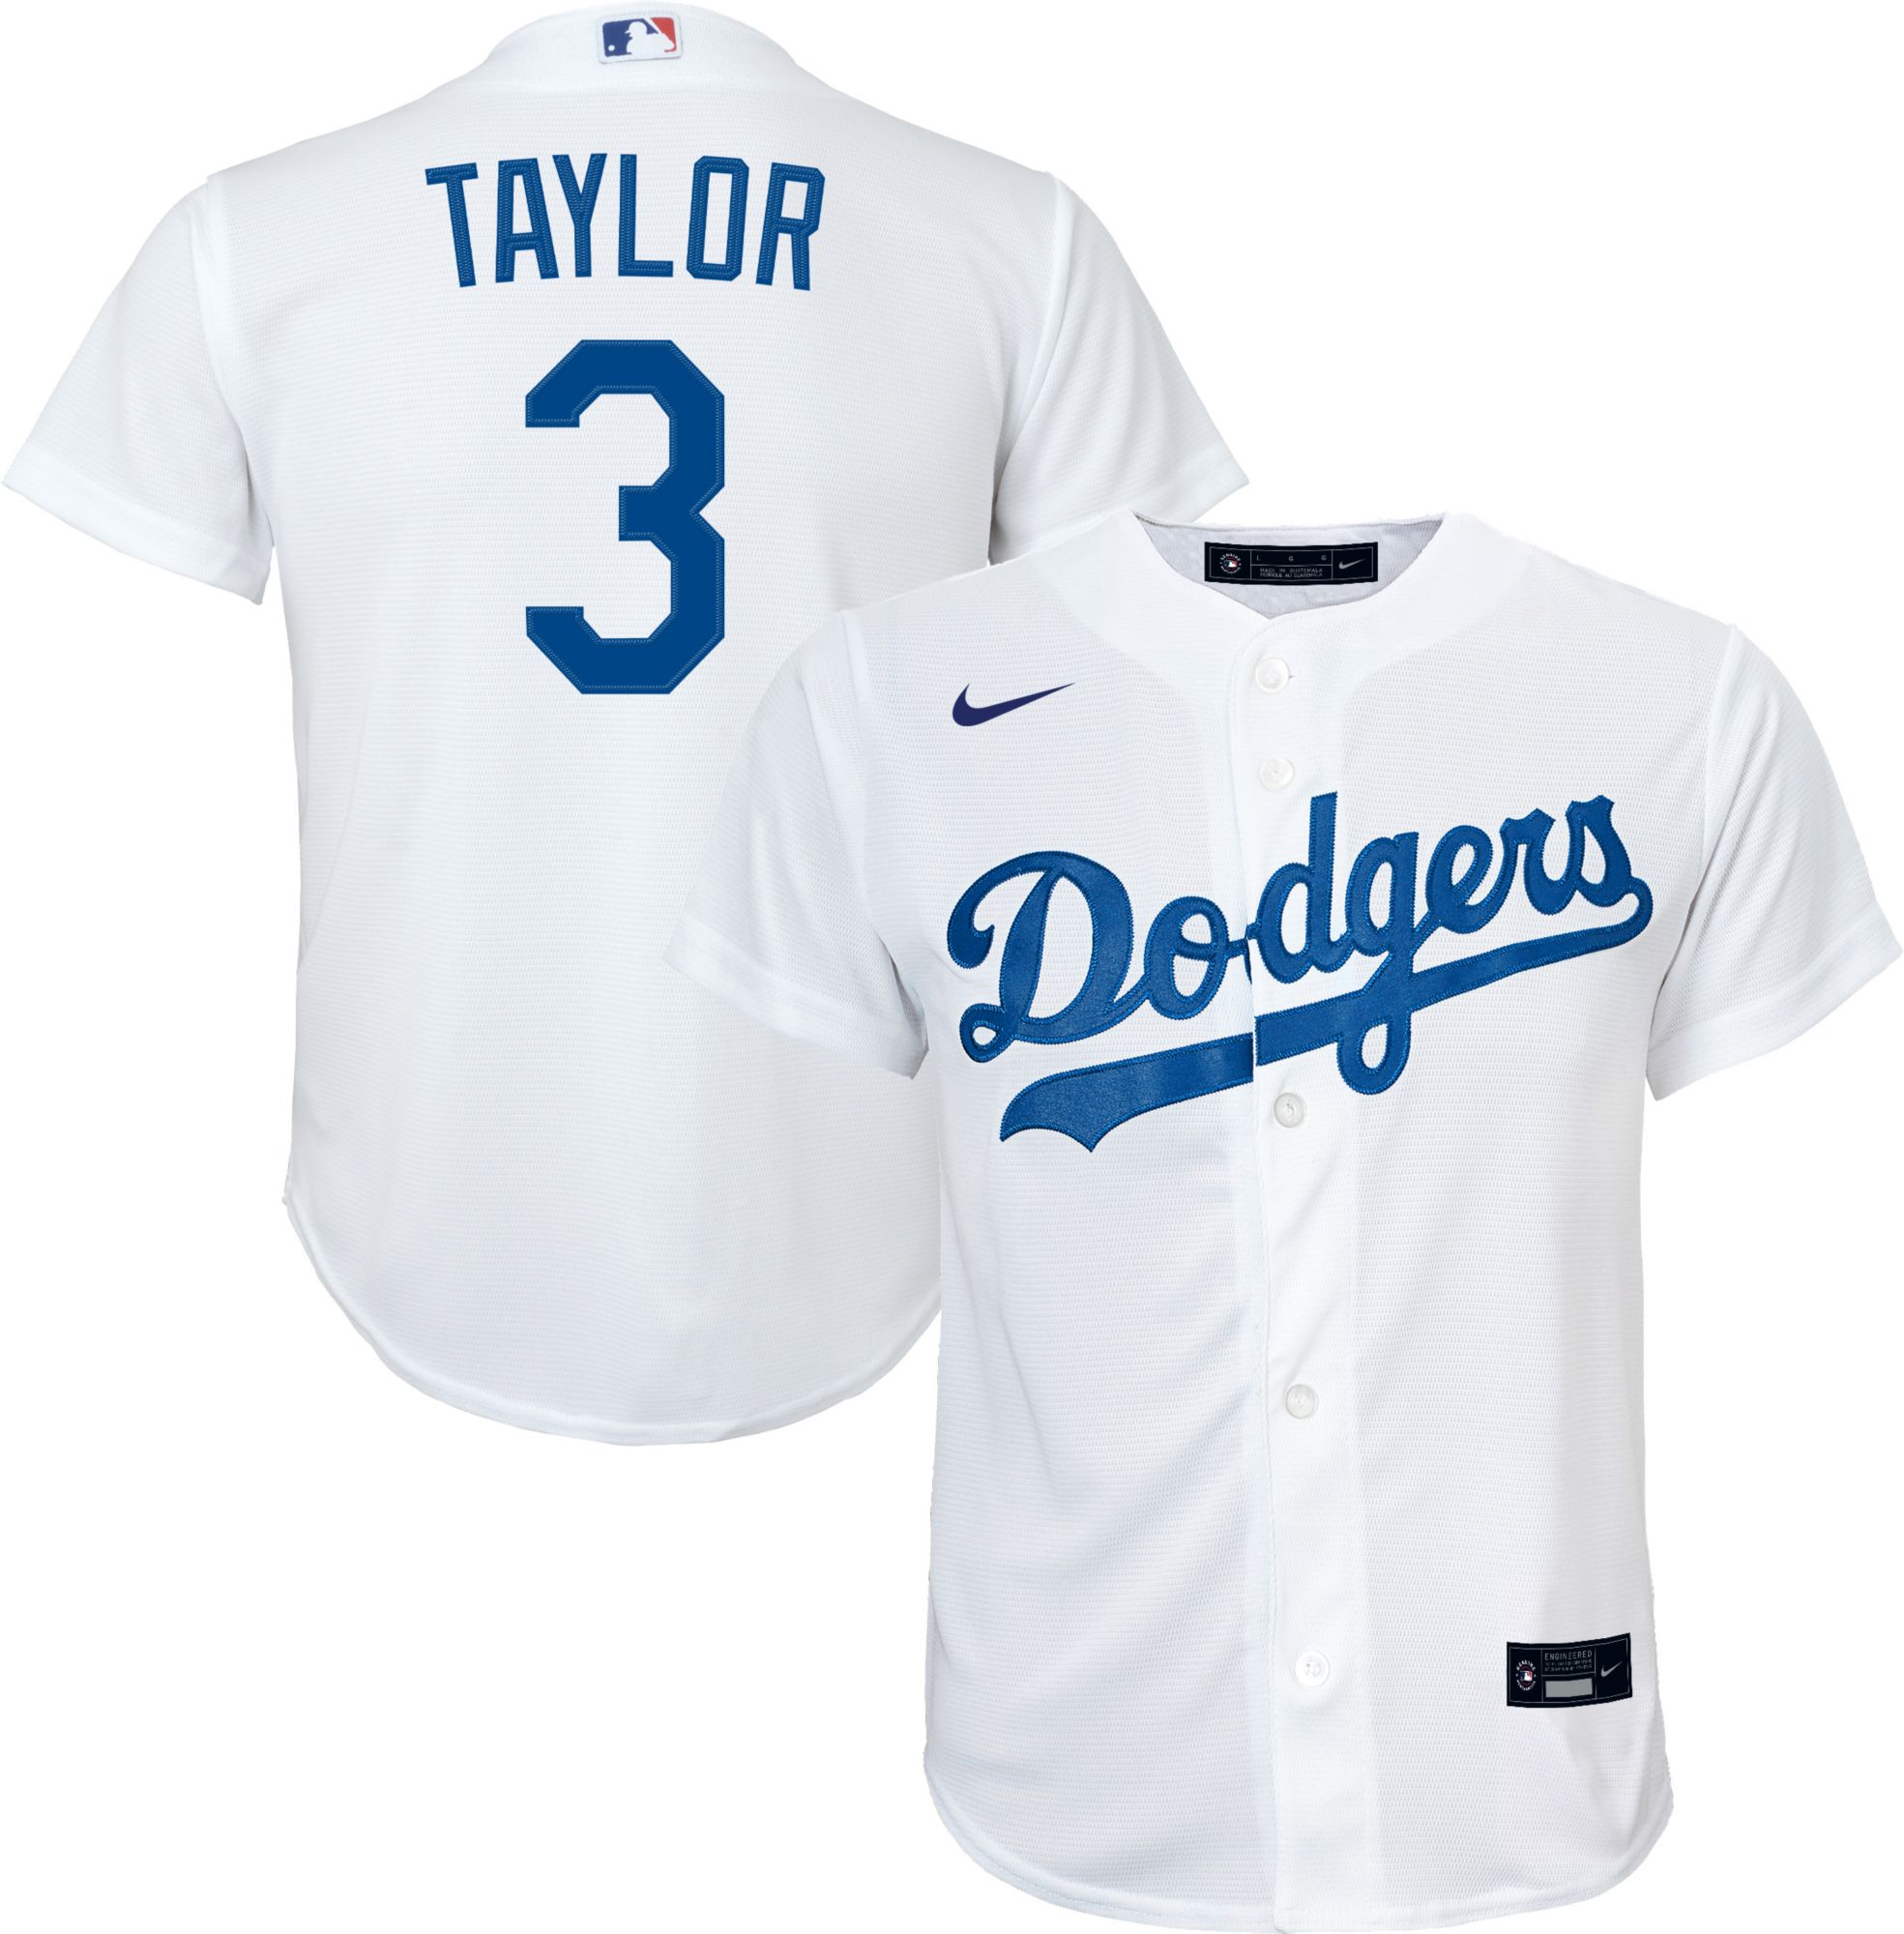 Nike Youth Replica Los Angeles Dodgers 